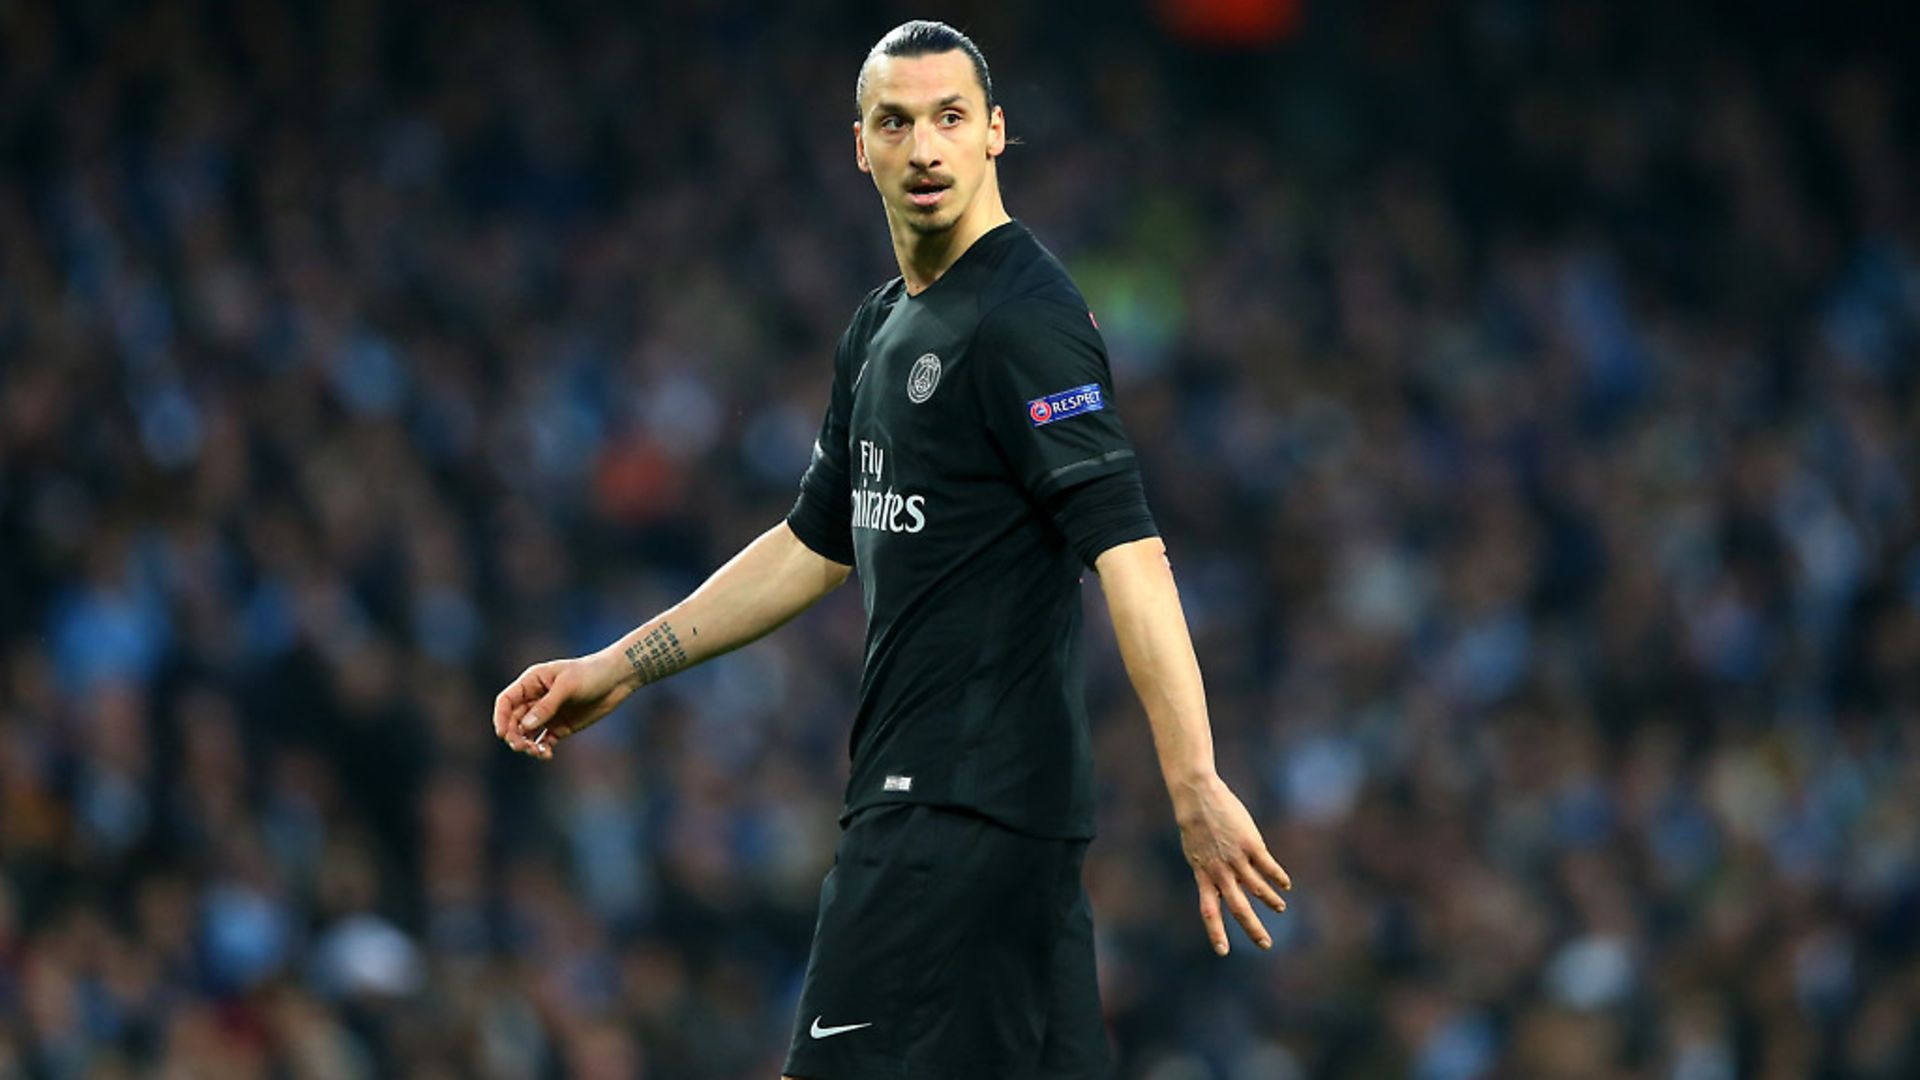 Zlatan Ibrahimovic (question six) (Photo by Alex Livesey/Getty Images) - Credit: Getty Images